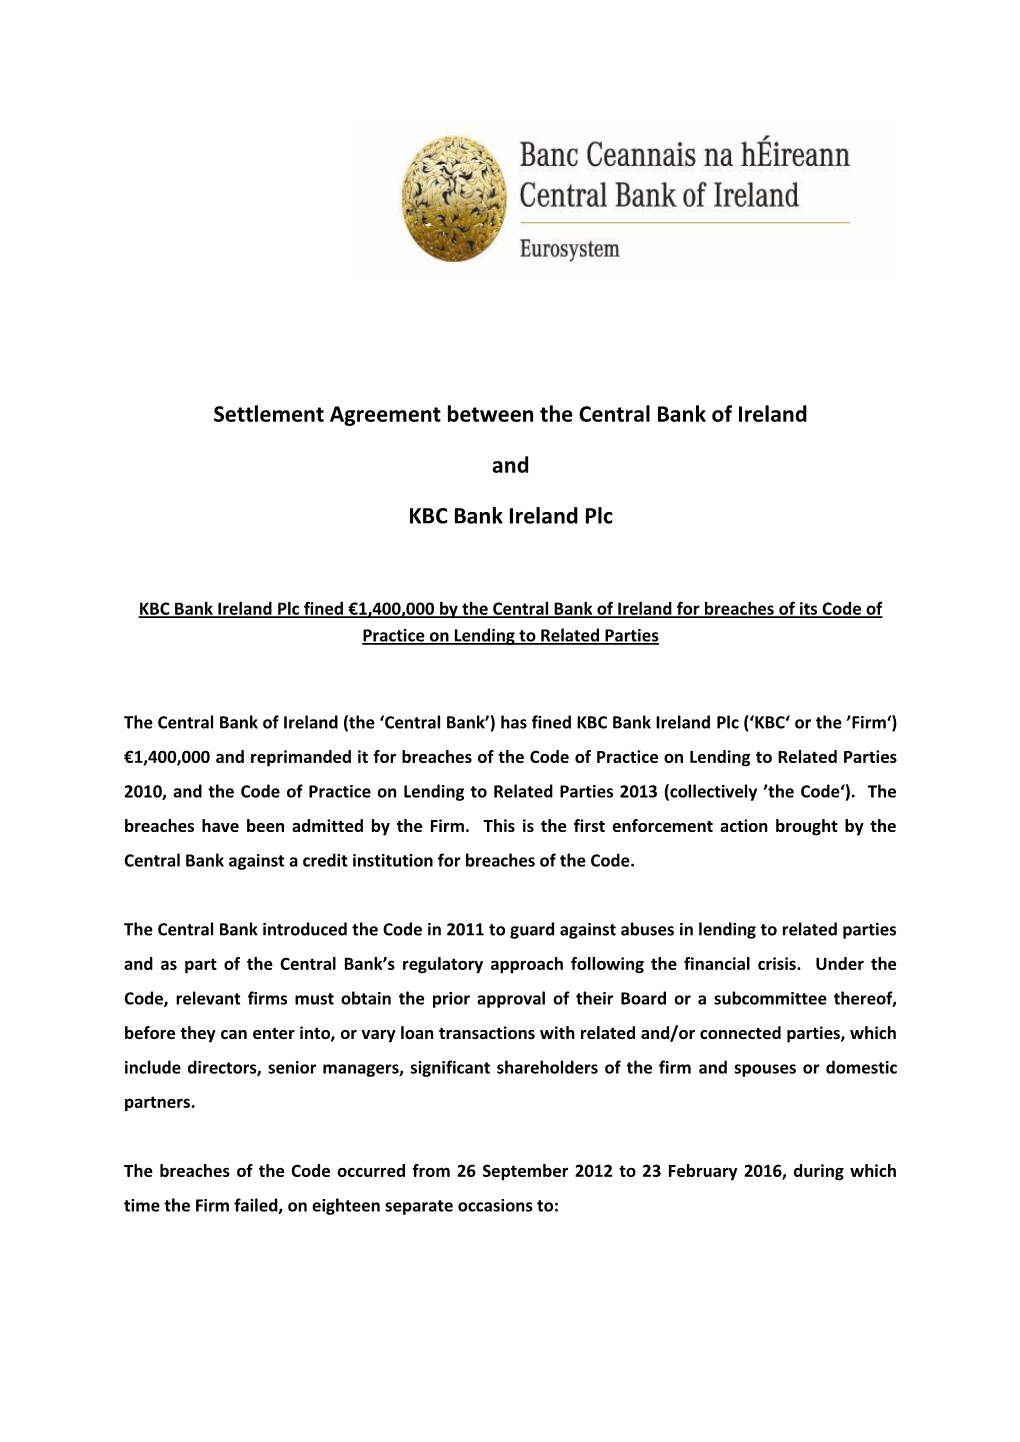 Public Statement Relating to Settlement Agreement Between the Central Bank of Ireland and KBC Bank Ireland